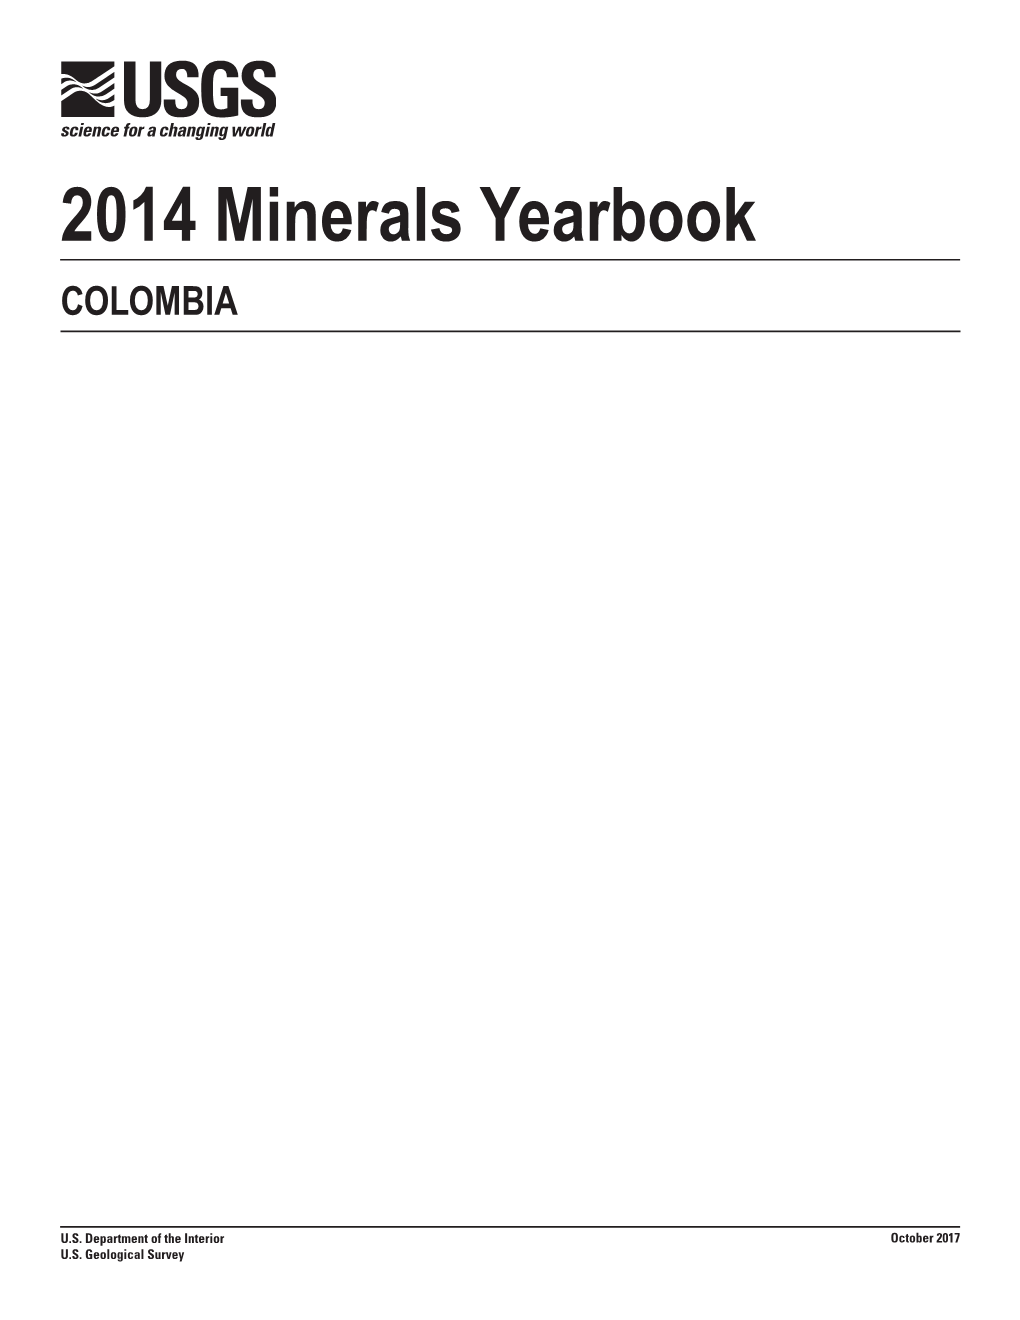 The Mineral Industry of Colombia in 2014